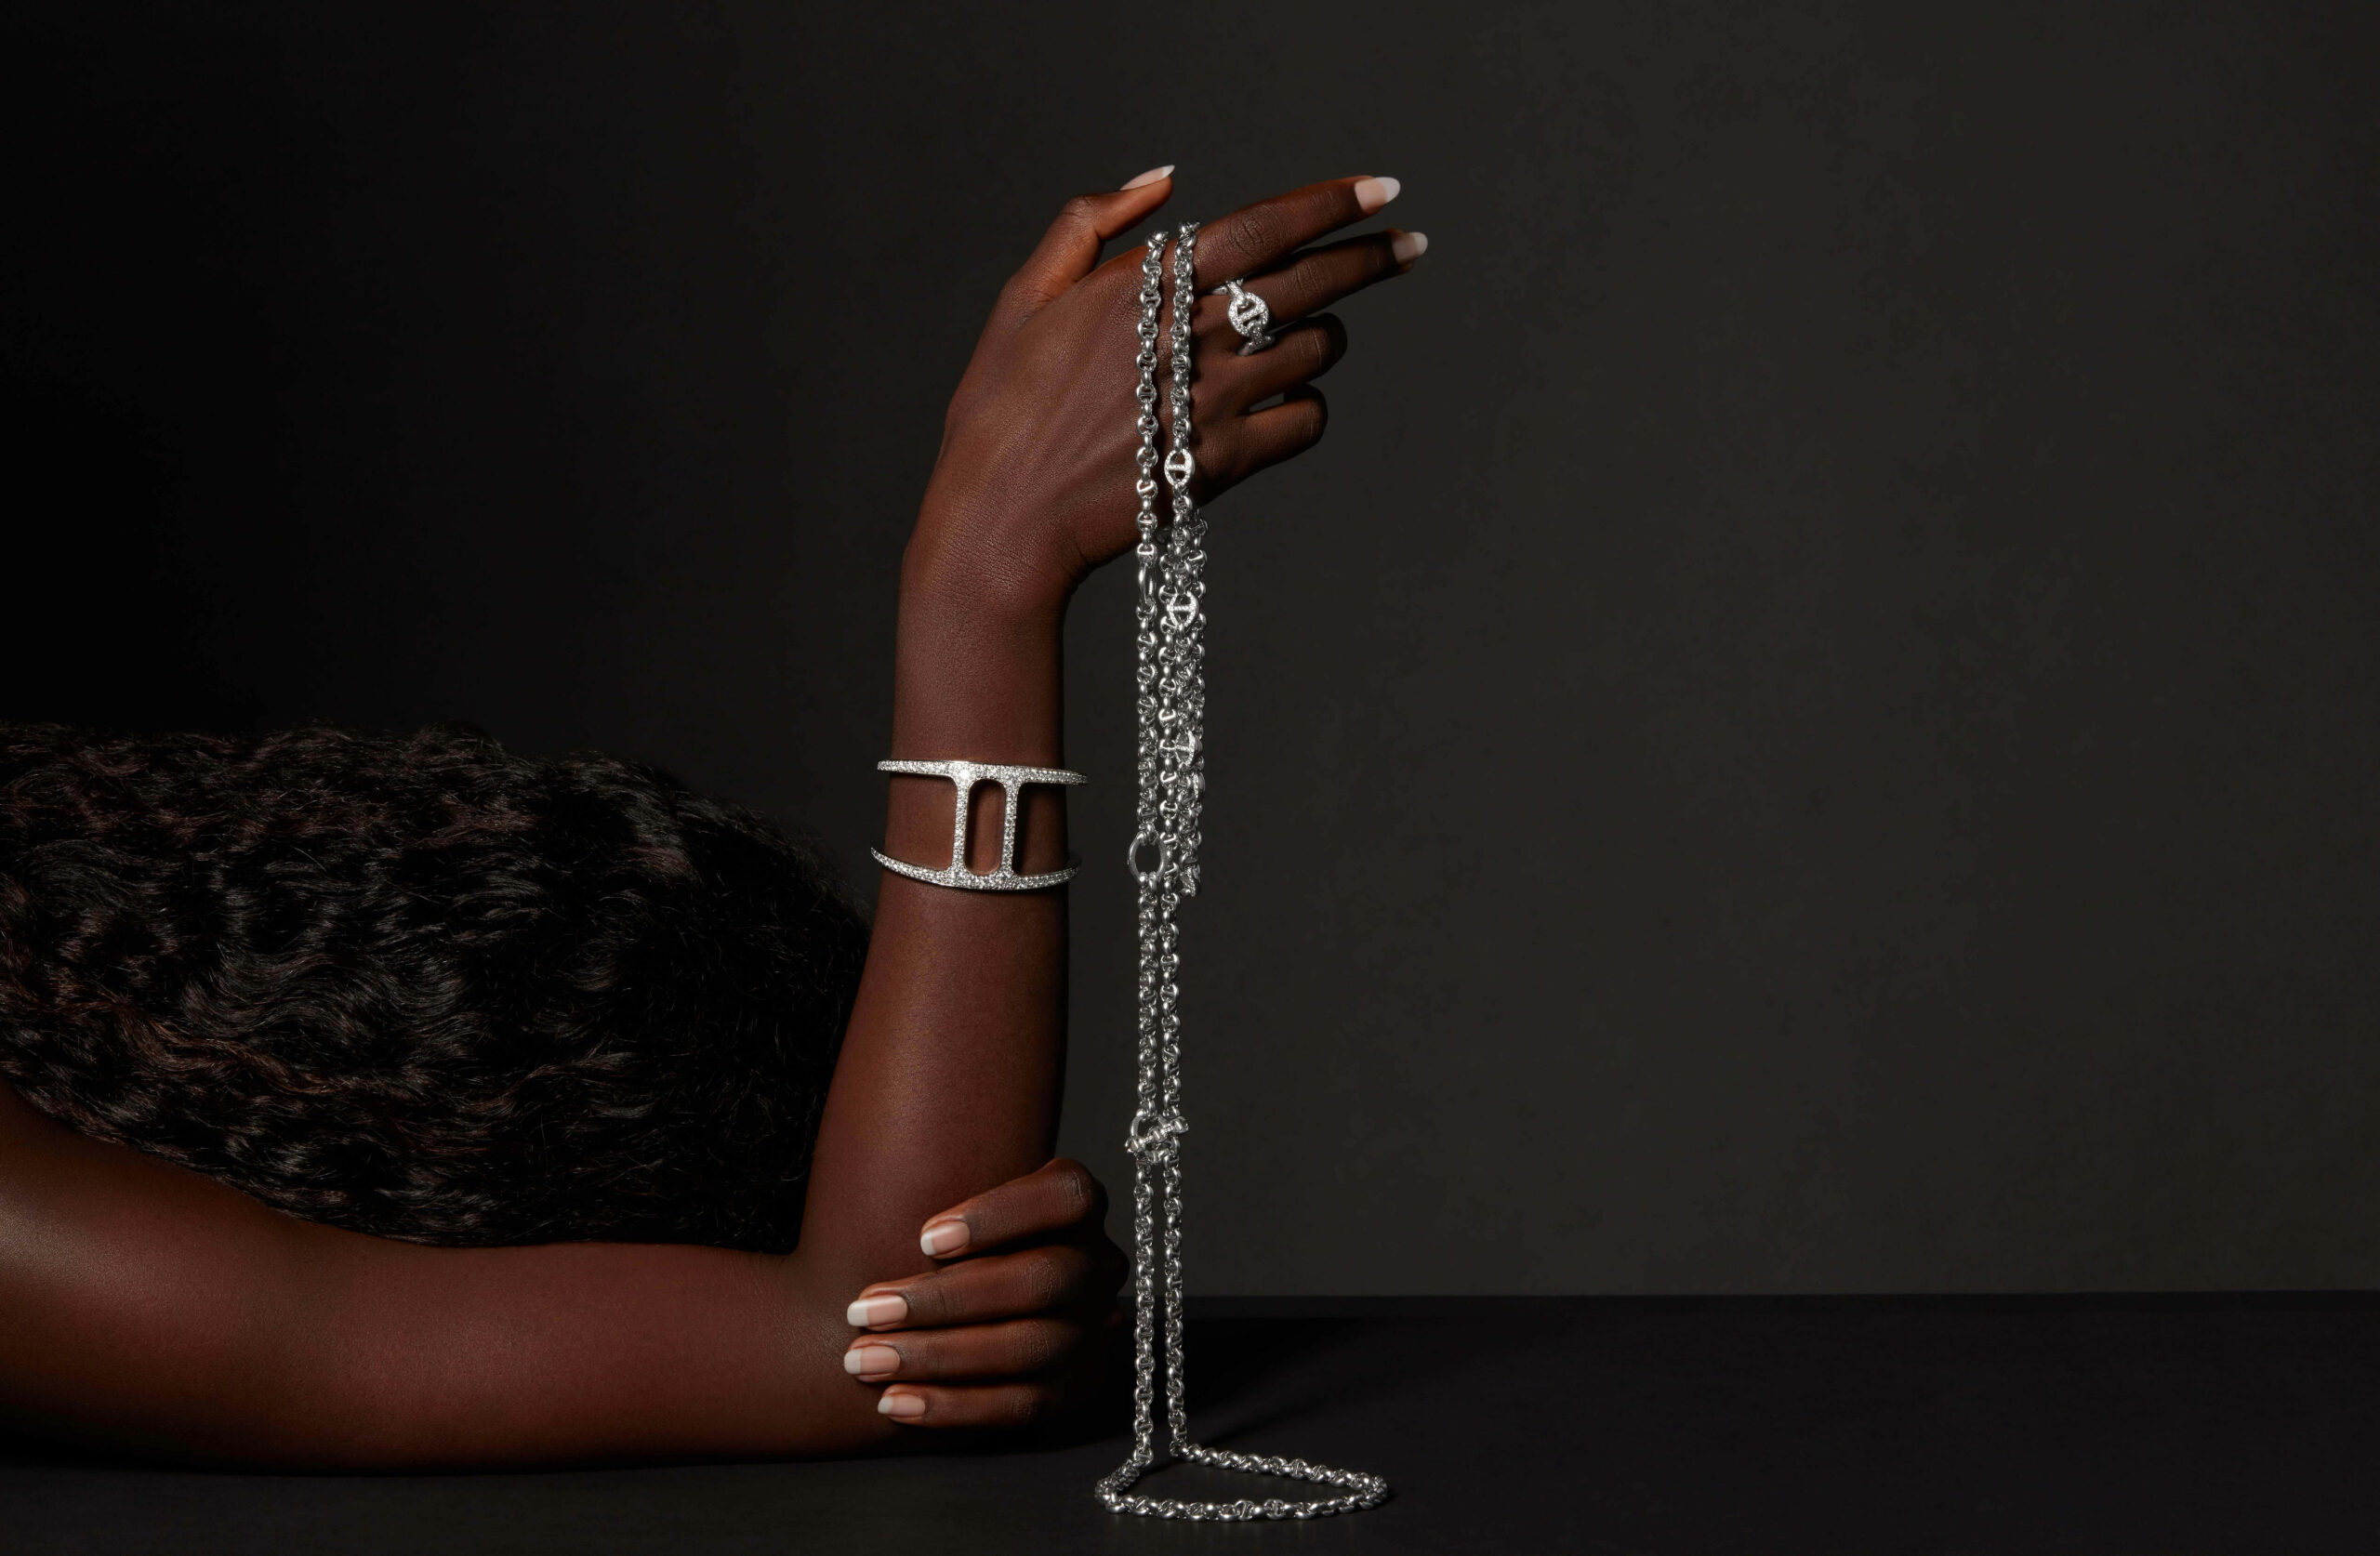 Image of a chain with ring and stylish hand cuff with diamonds holding by a woman hand